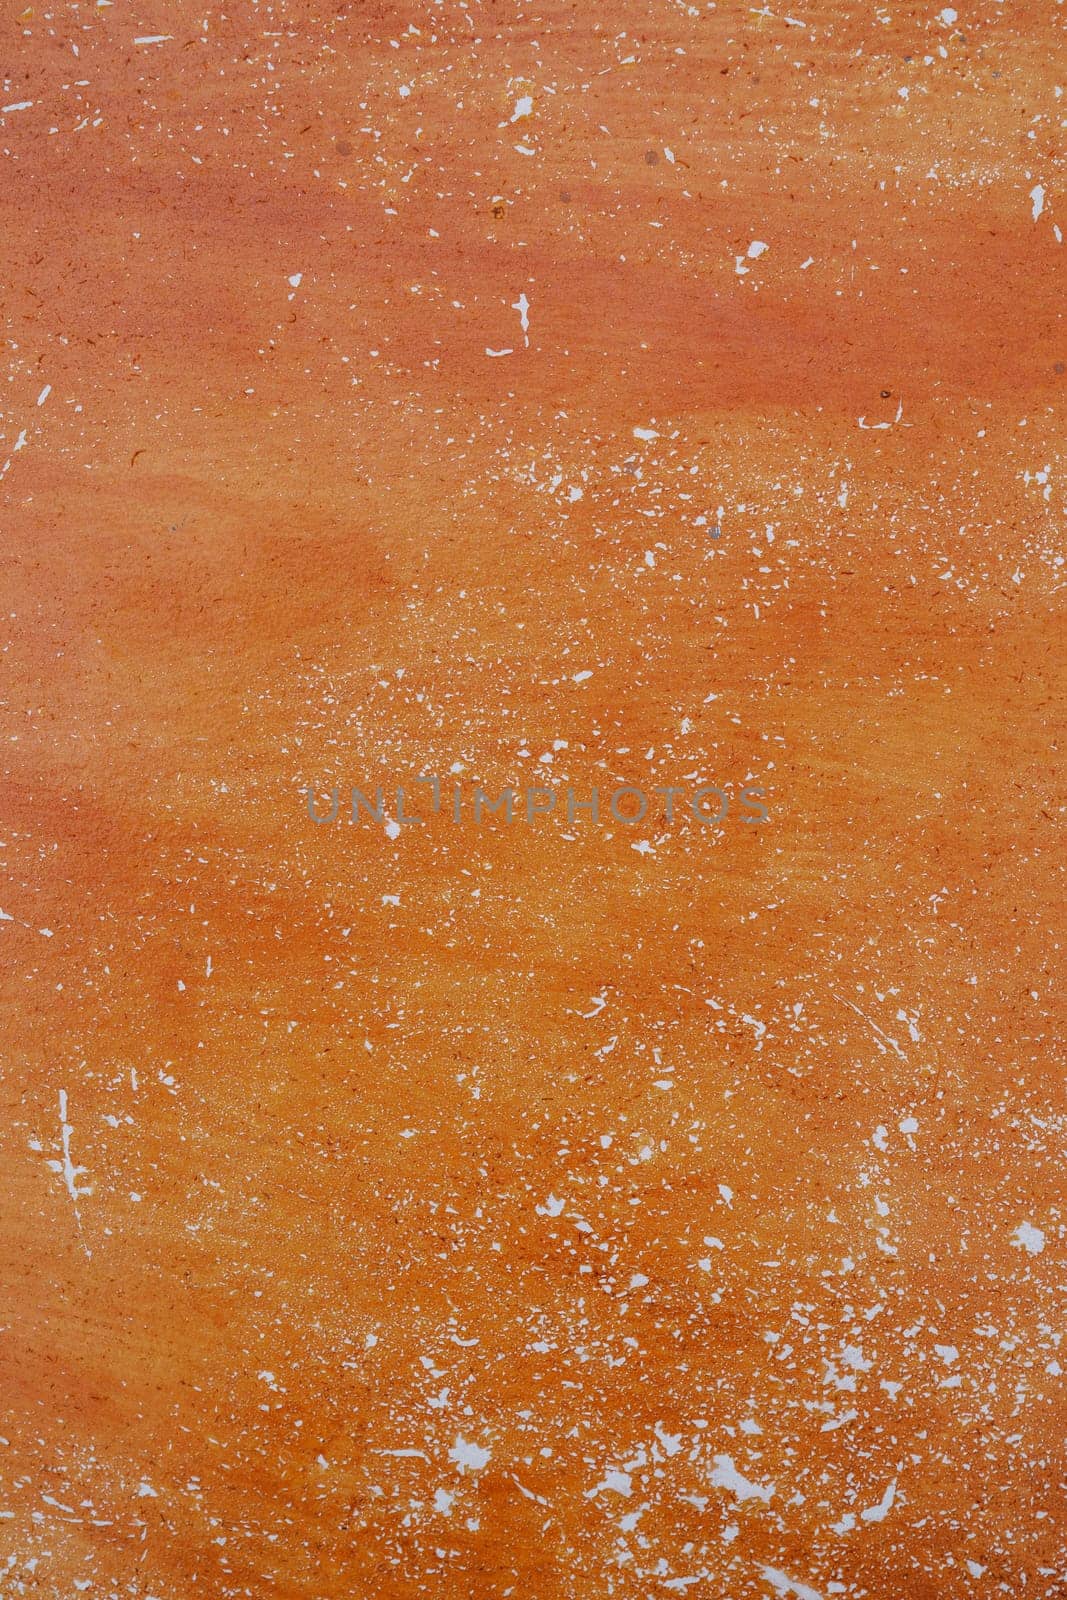 Texture of orange peeling paint with chips on a white surface by Nadtochiy